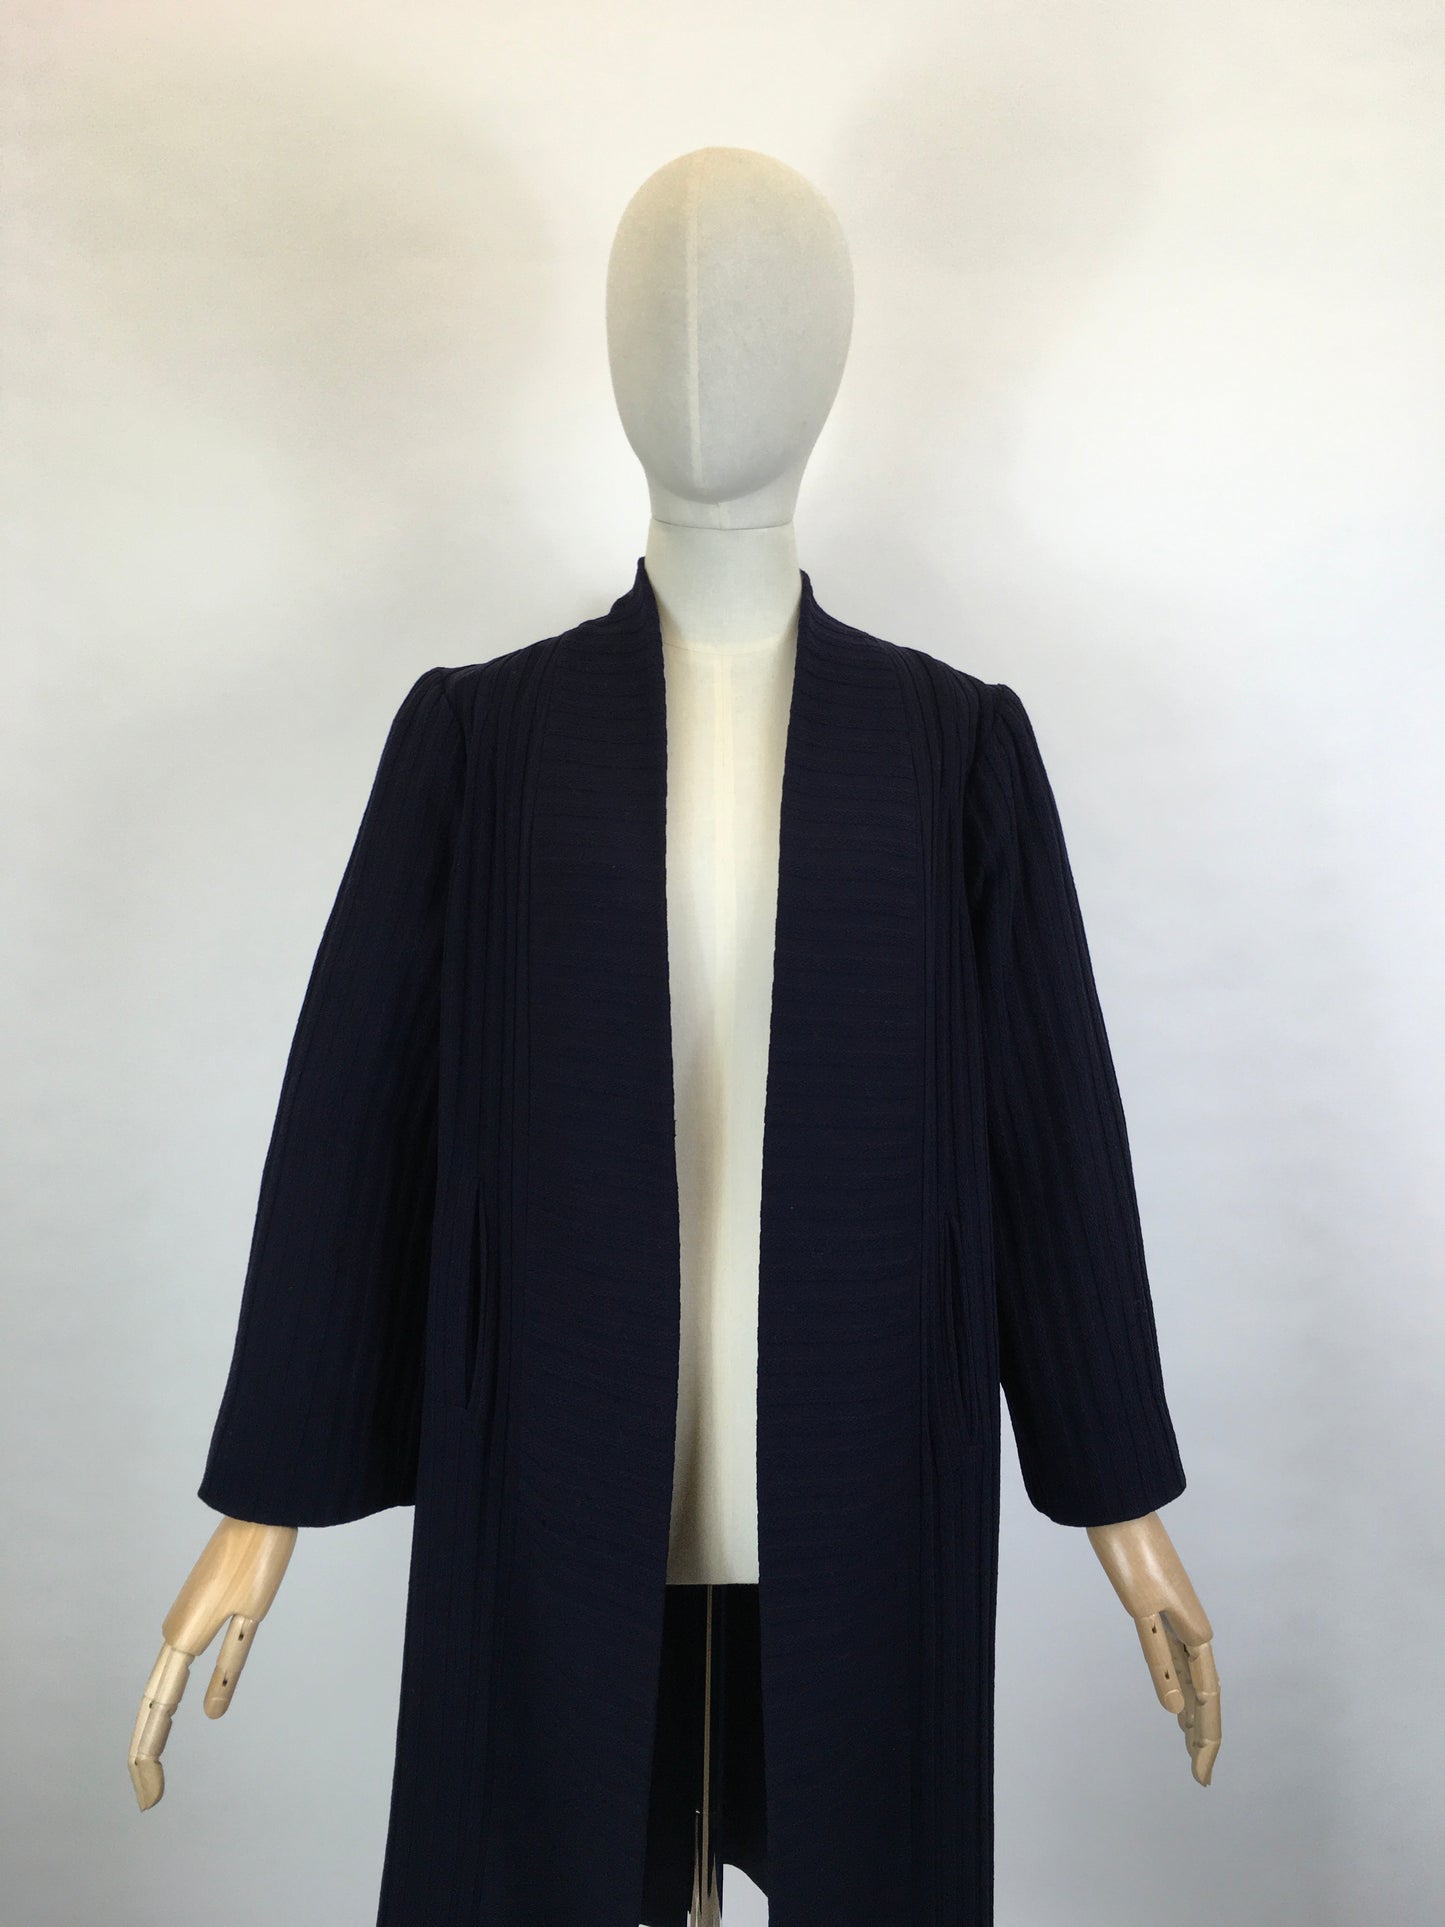 Original Mid to Late 1930’s Navy Edge to Edge Coat - In A Beautiful Woollen Textured Crepe